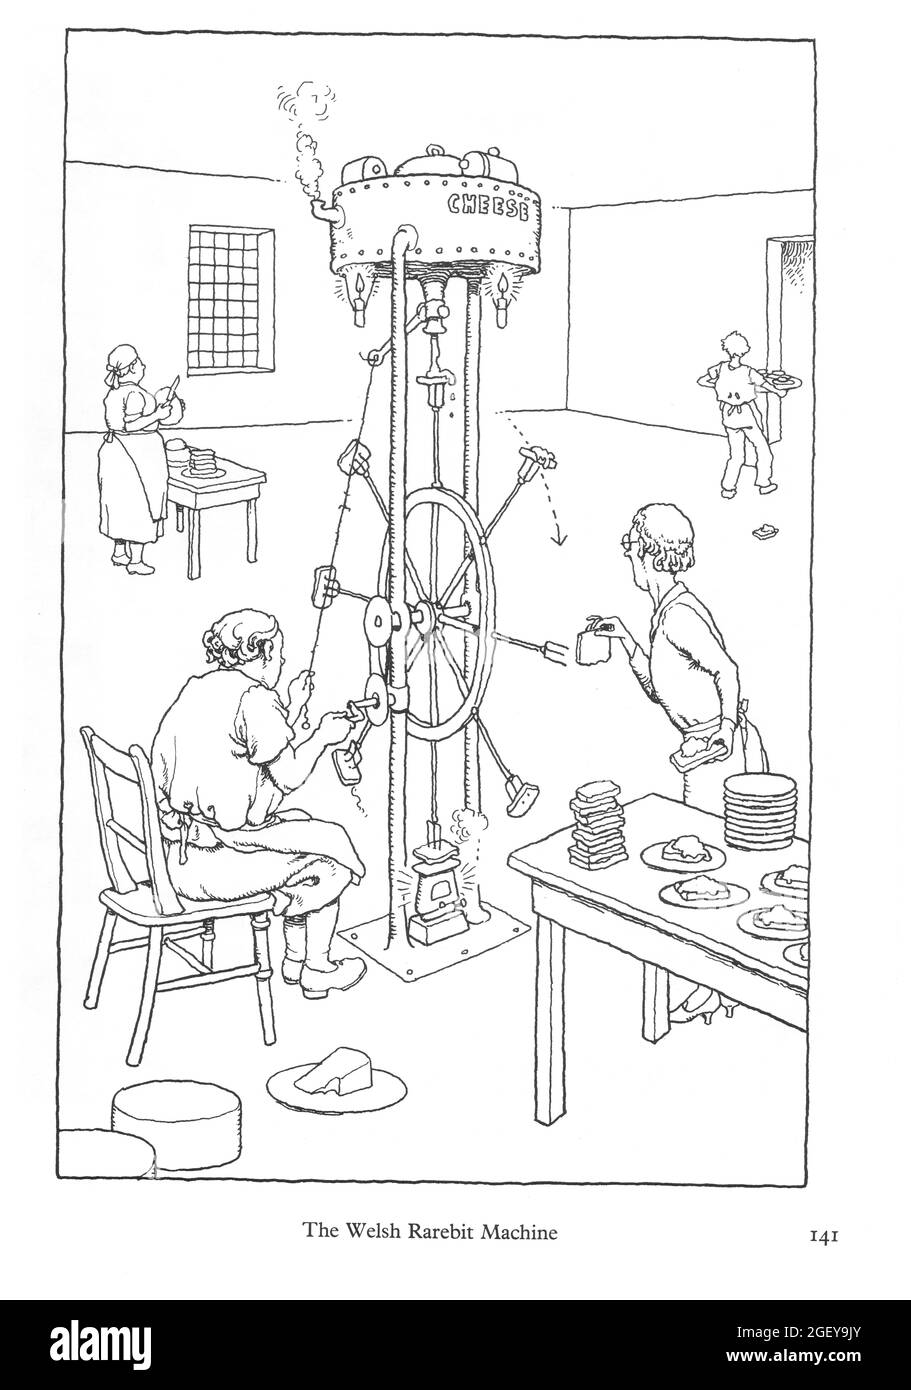 Page from William Heath Robinson (1872-1944) Inventions: The Welsh Rarebit Machine Stock Photo